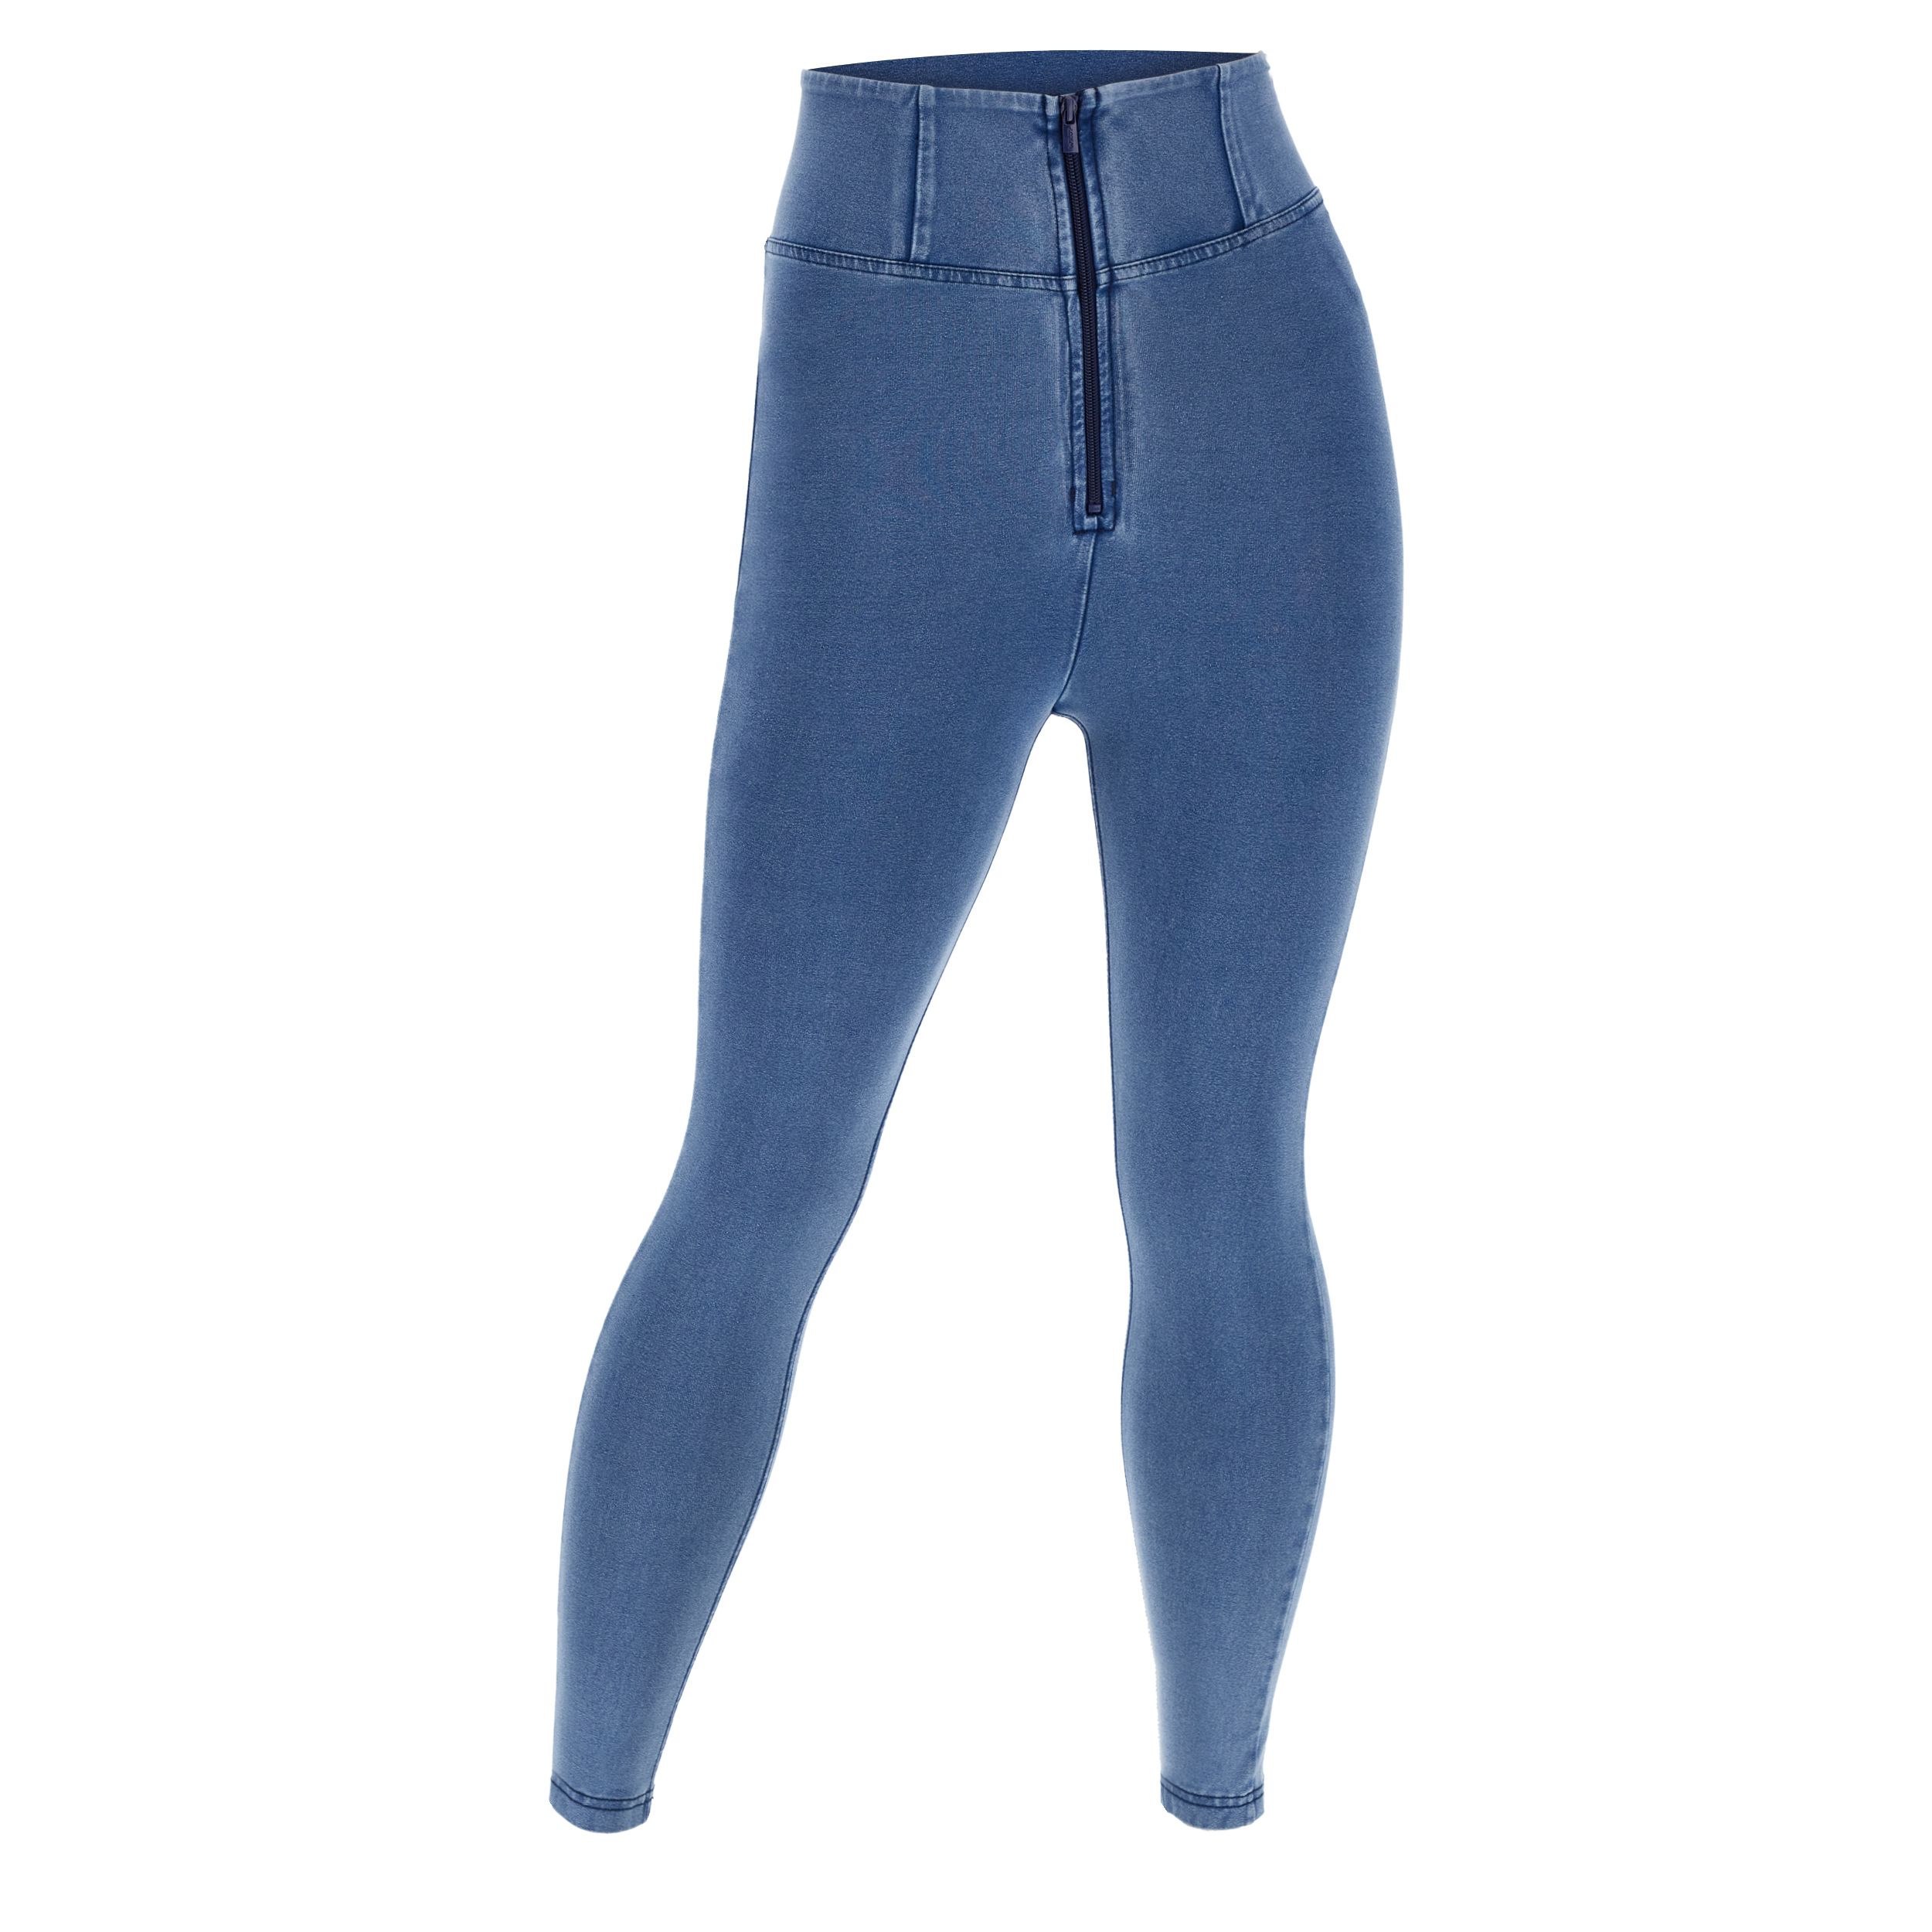 WR.UP® 7/8 curvy jeggings with superskinny leg and high waist